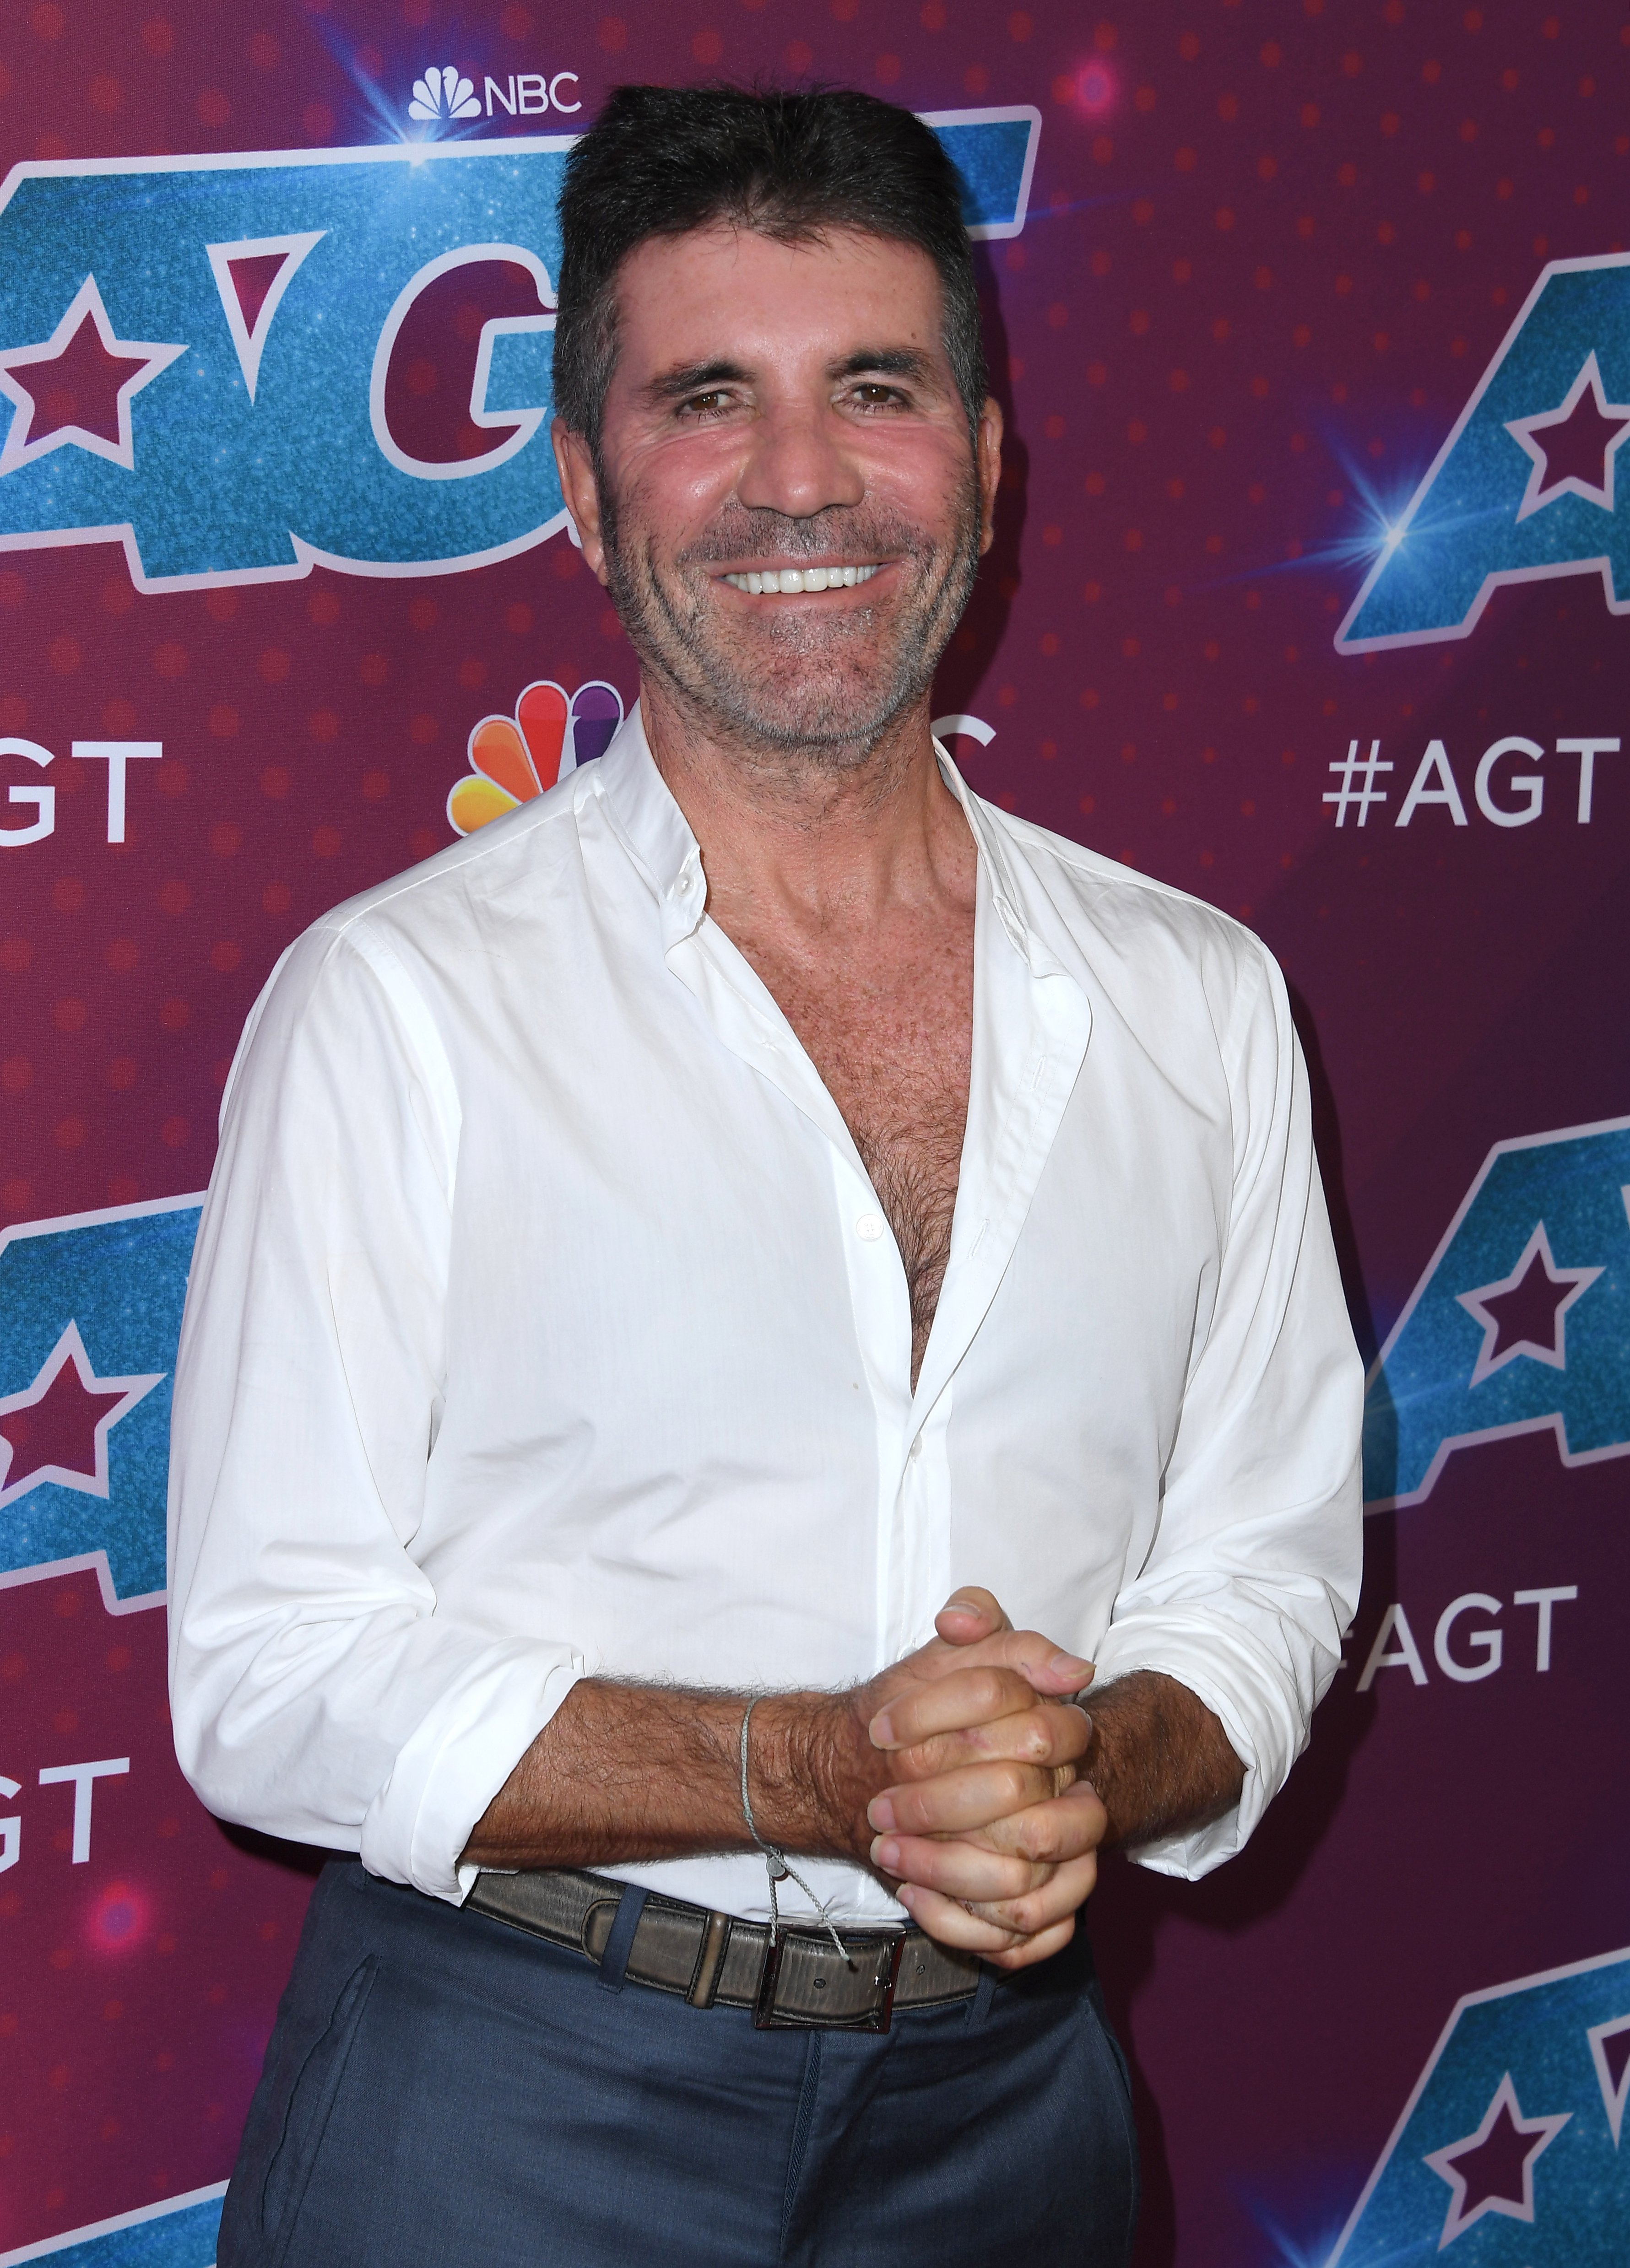 Simon Cowell on the Red Carpet For "America's Got Talent" season 17 finale on September 14, 2022, in Pasadena, California. | Source: Getty Images